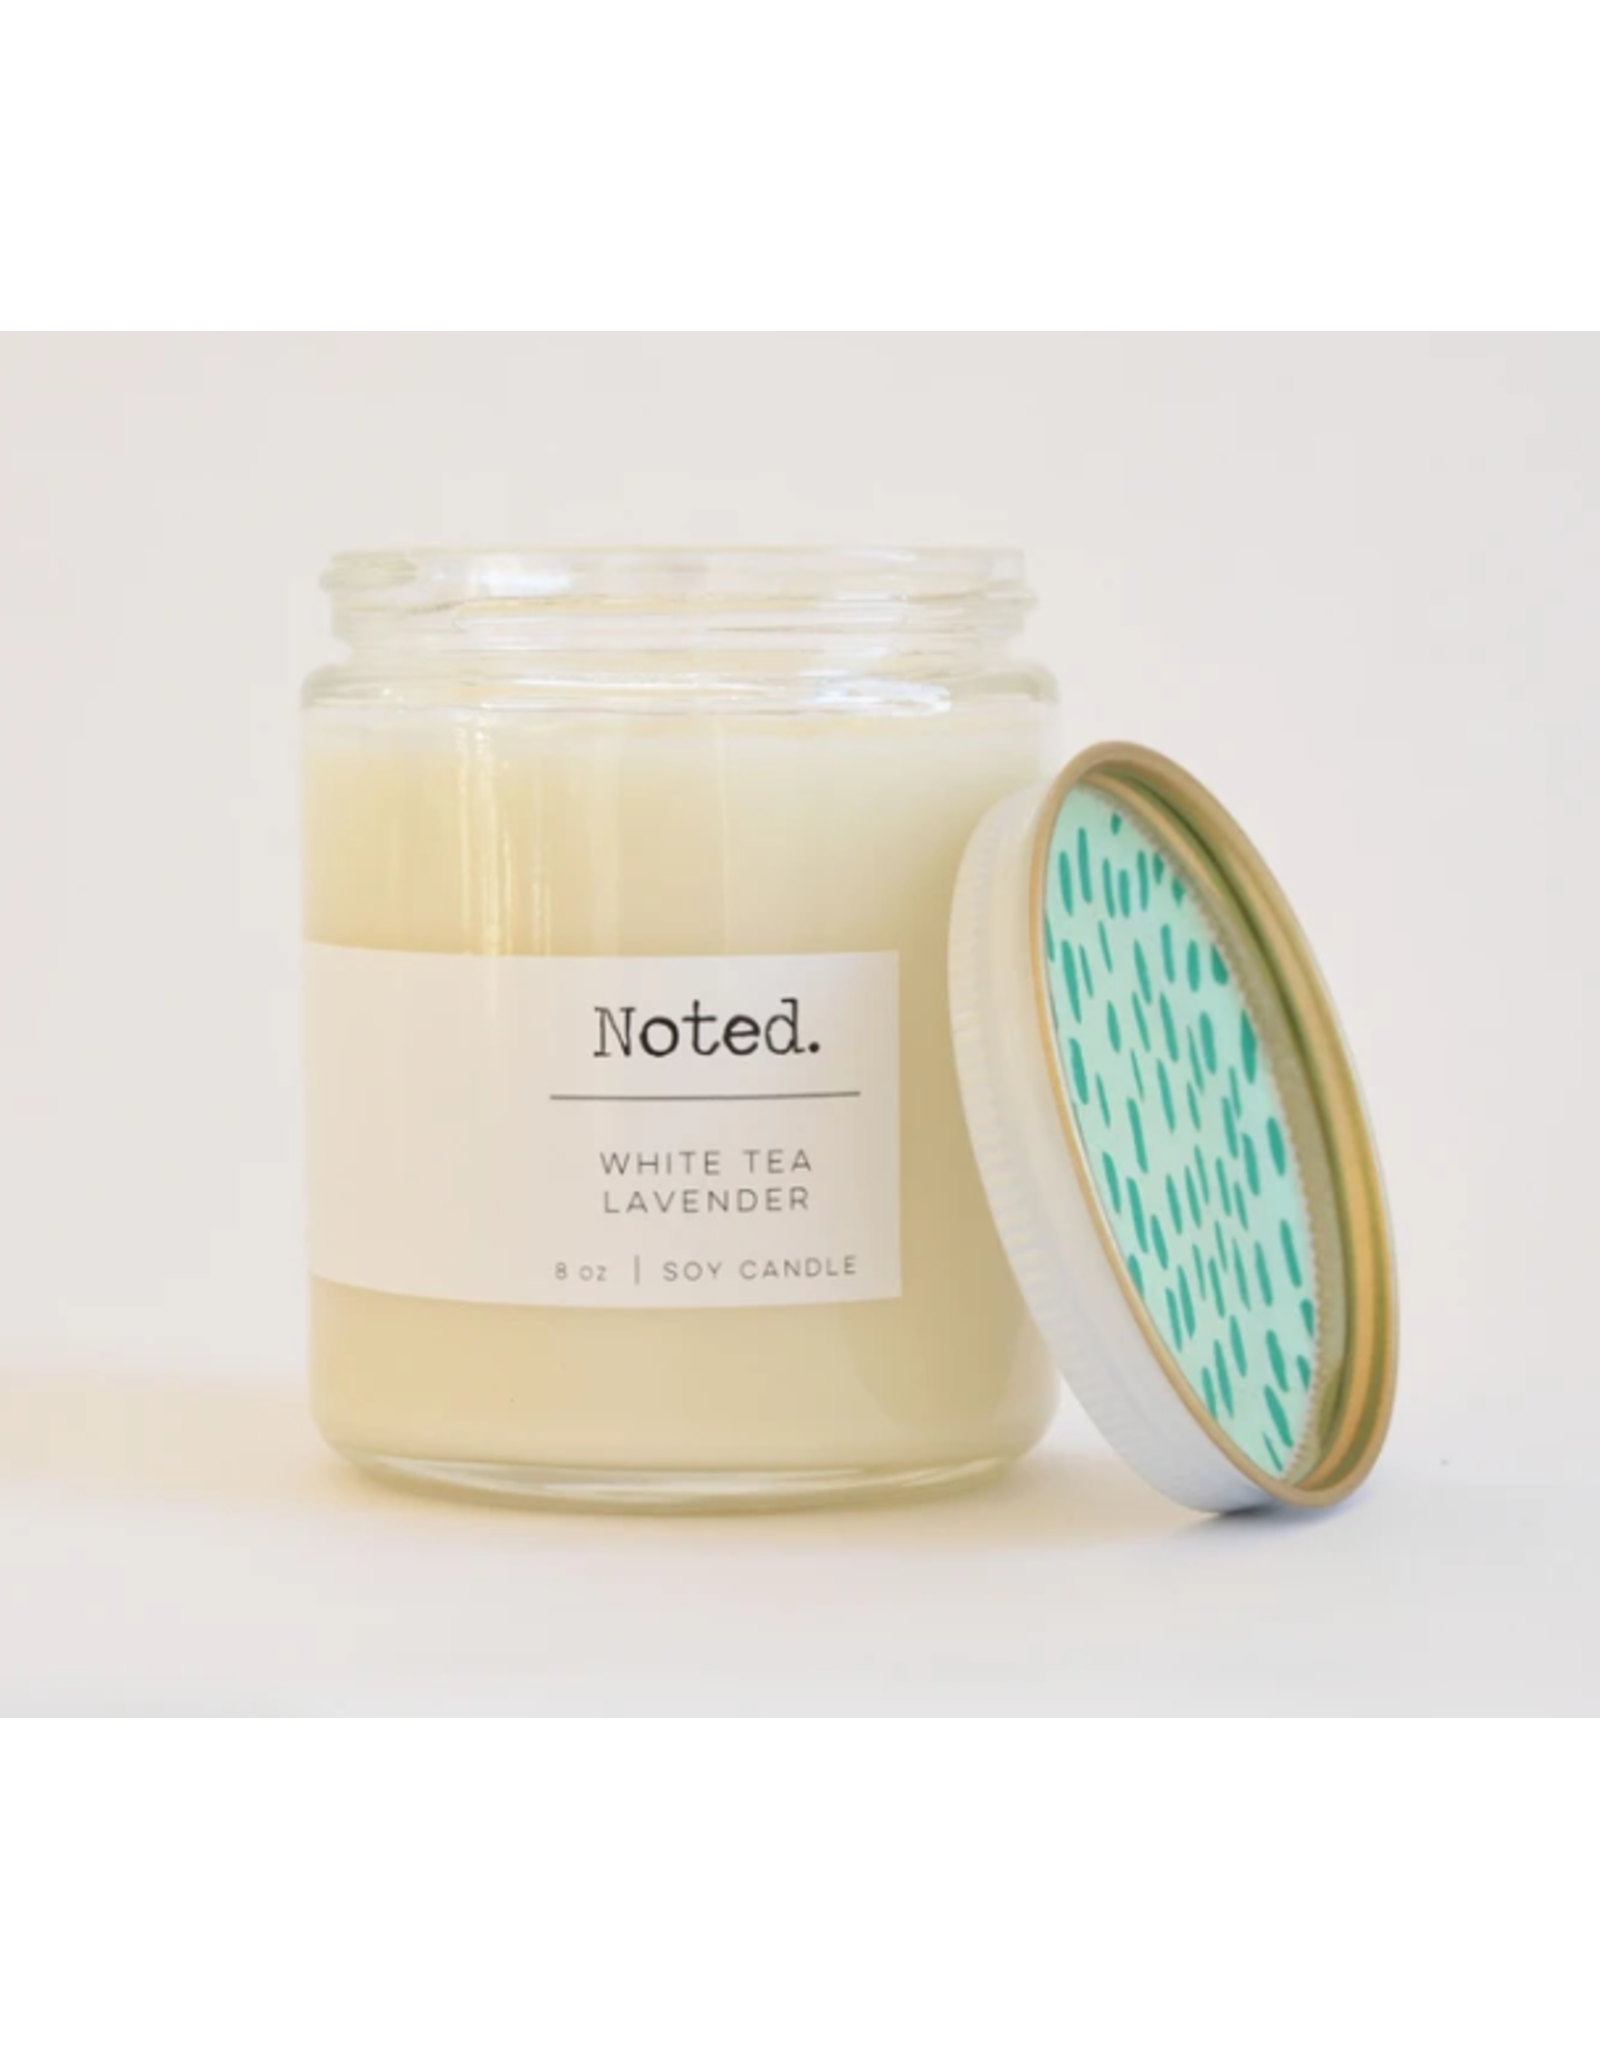 Noted White Tea Lavender Candle 8oz